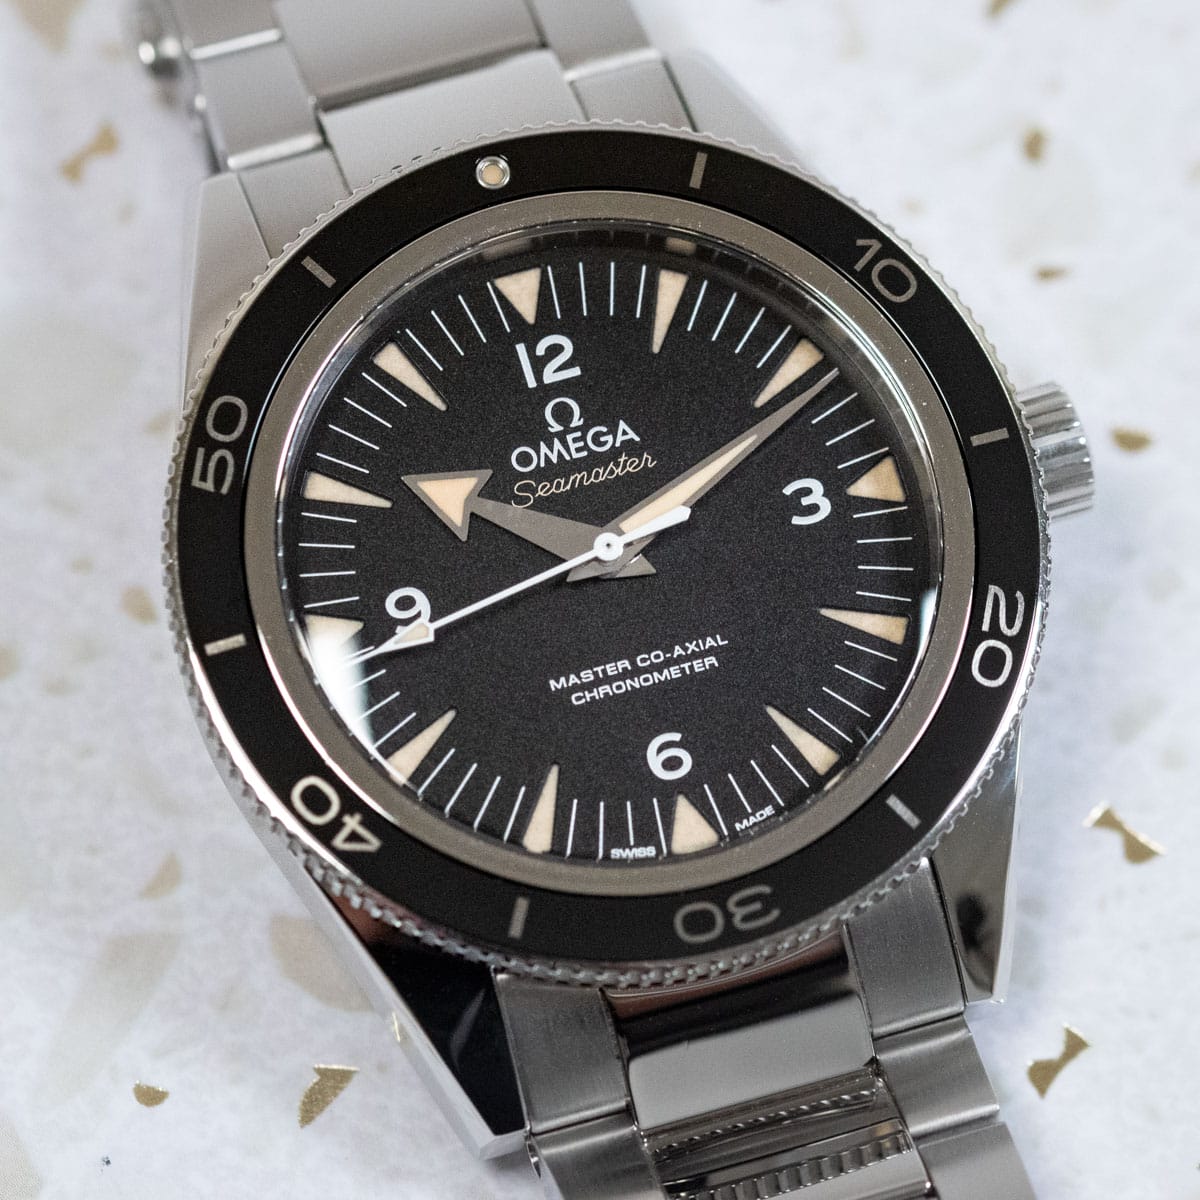 Stylied photo of  of Seamaster 300 Master Co-Axial